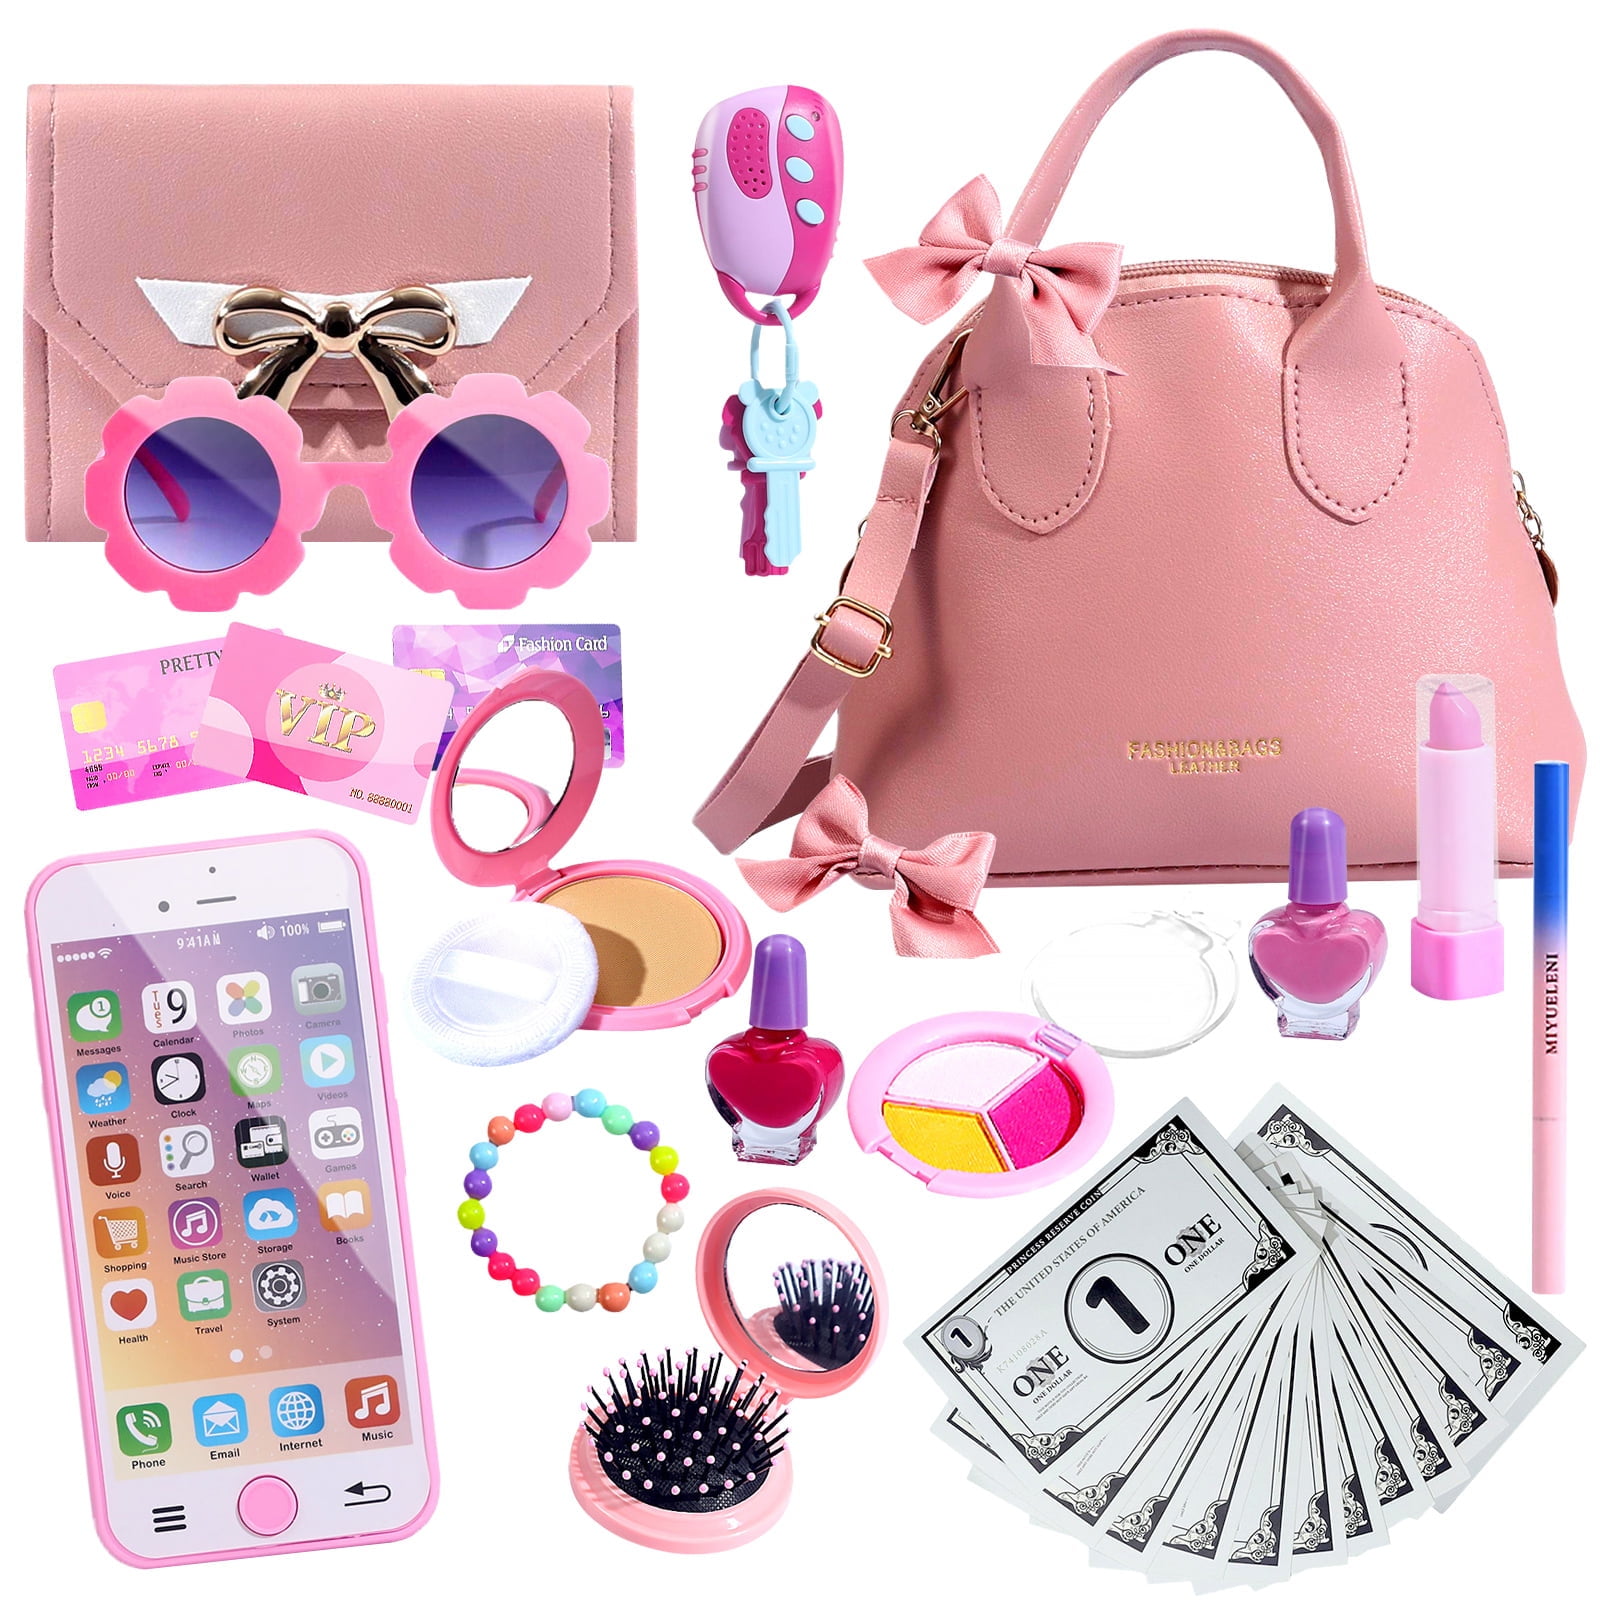 Rirool Princess Themed Play Purse 31 Piece Toy Set with Handbag Pretend Makeup Smartphone and More Perfect for Girls Role Playing Ages 3 8 8196b734 d996 4538 ab48 1433541d1433.e29f7403acf90f47a477c1fdf9f1f1de